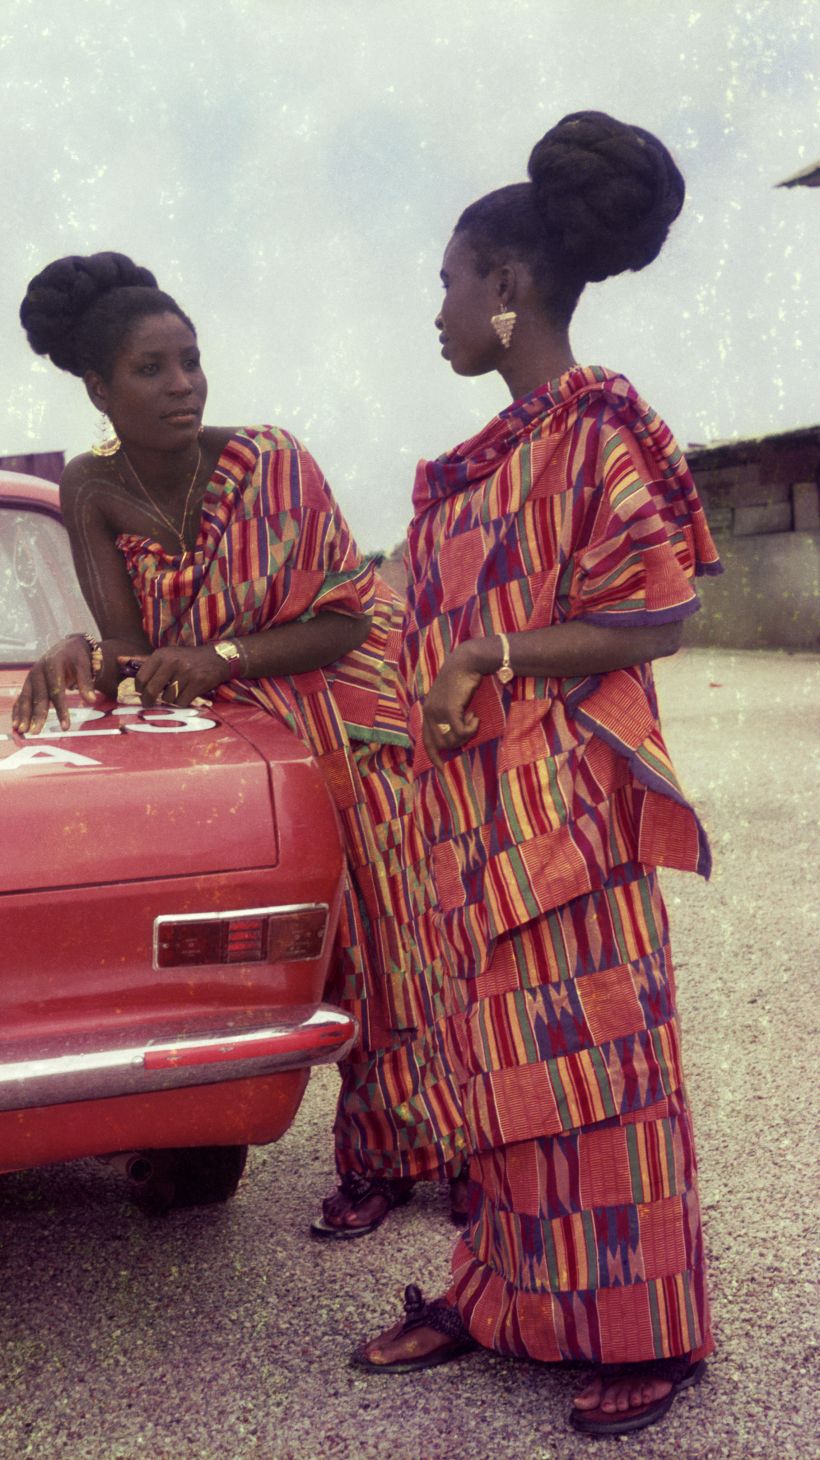 Two women dressed for a church celebration stand next to a red car